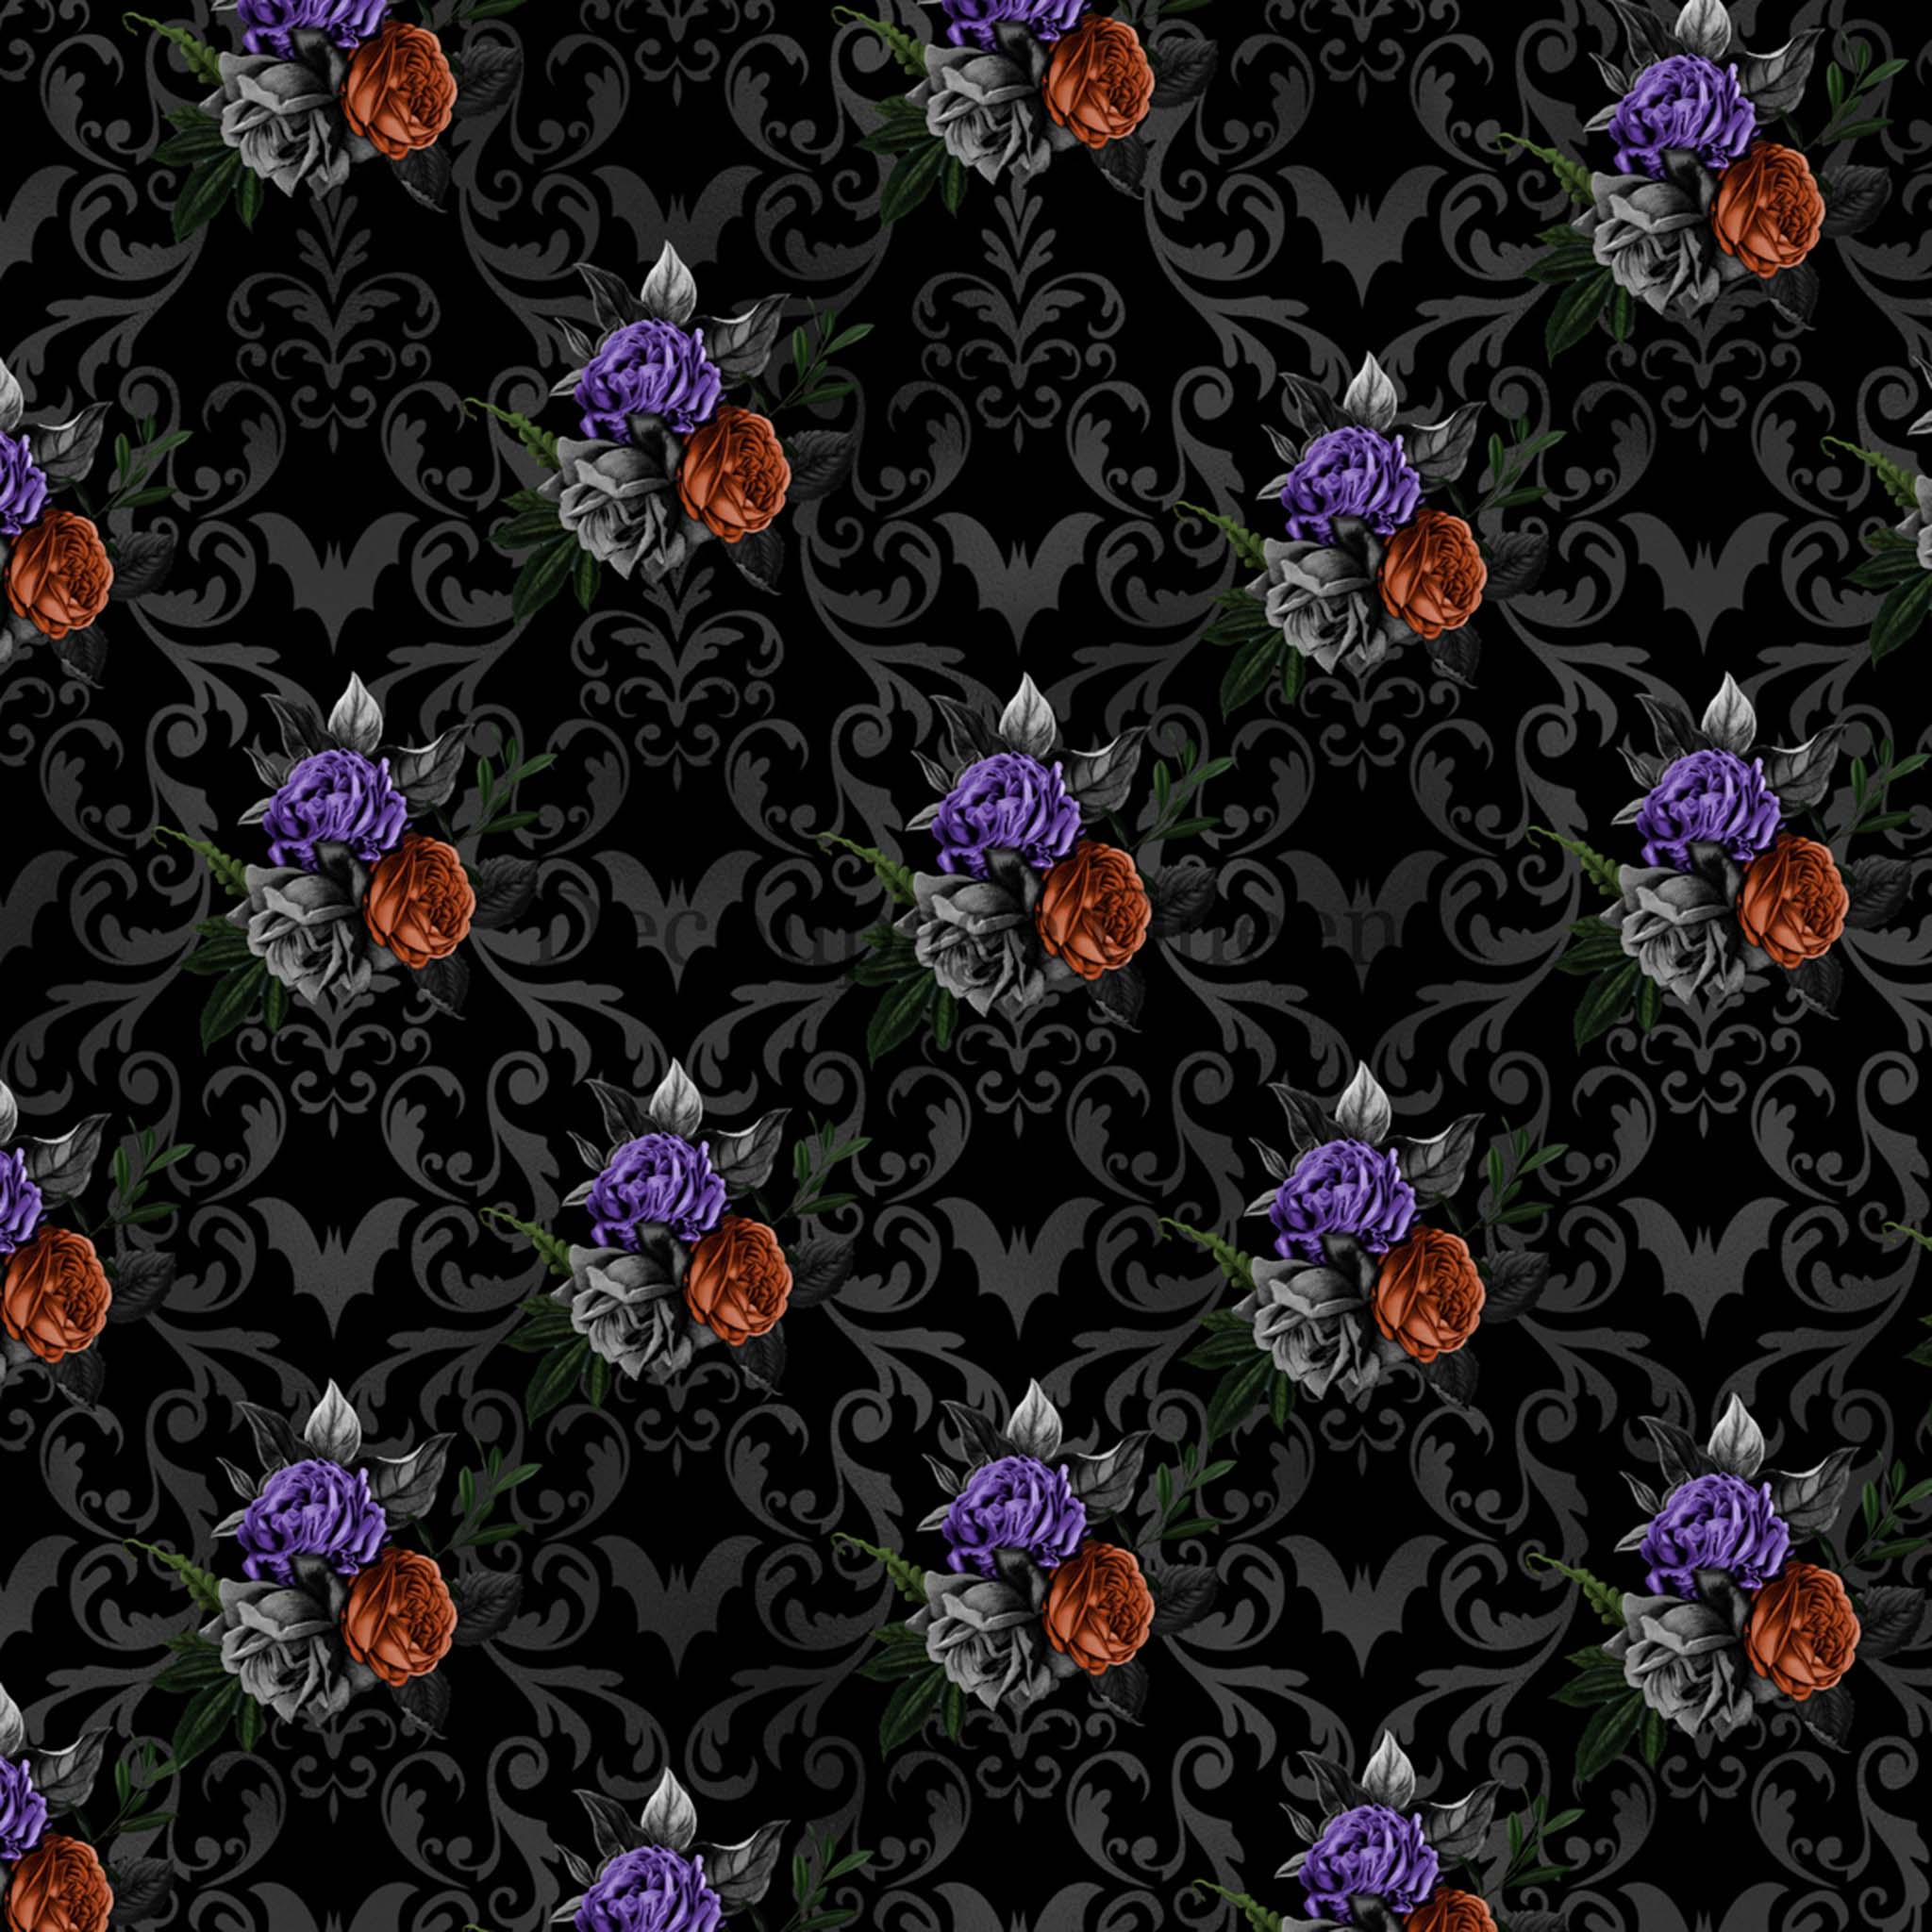 A2 rice paper design that features a dark floral Halloween pattern of bunched grey, purple and red roses surrounded by a grey brocade all against a black background.